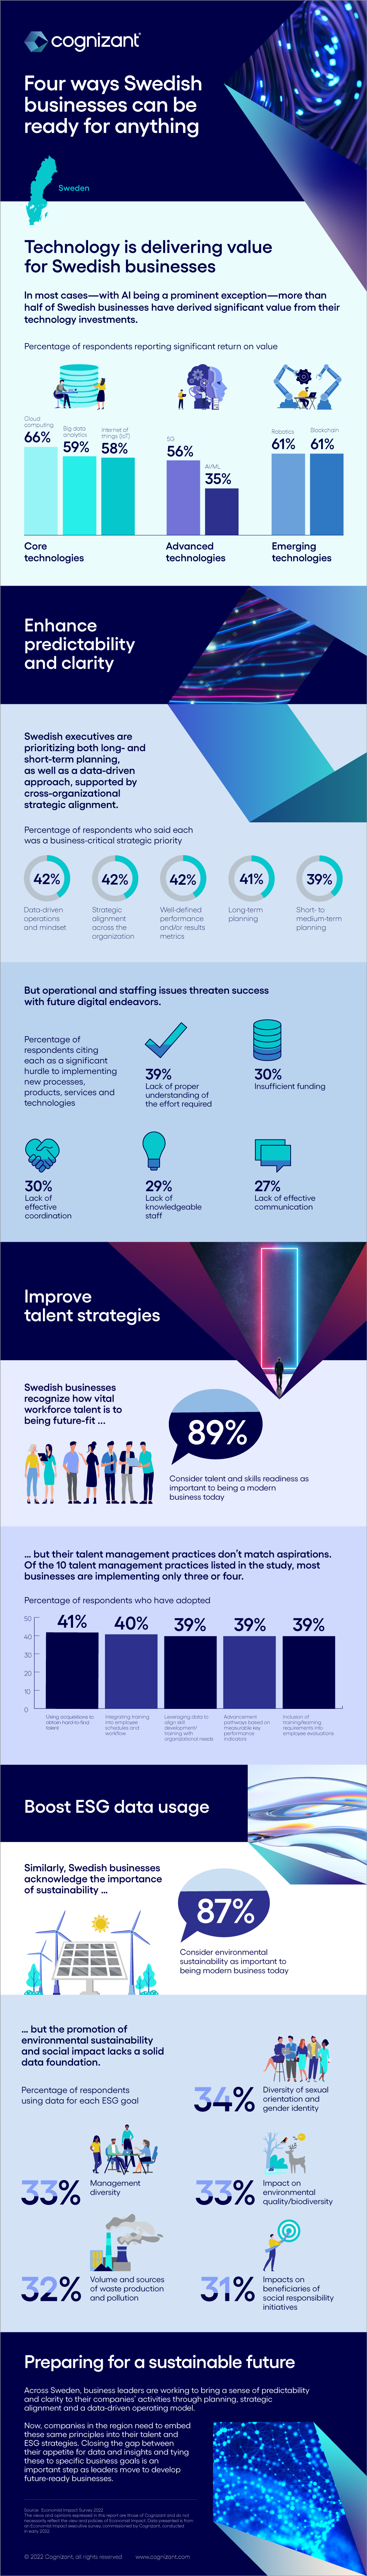 How Swedish firms can become future-fit